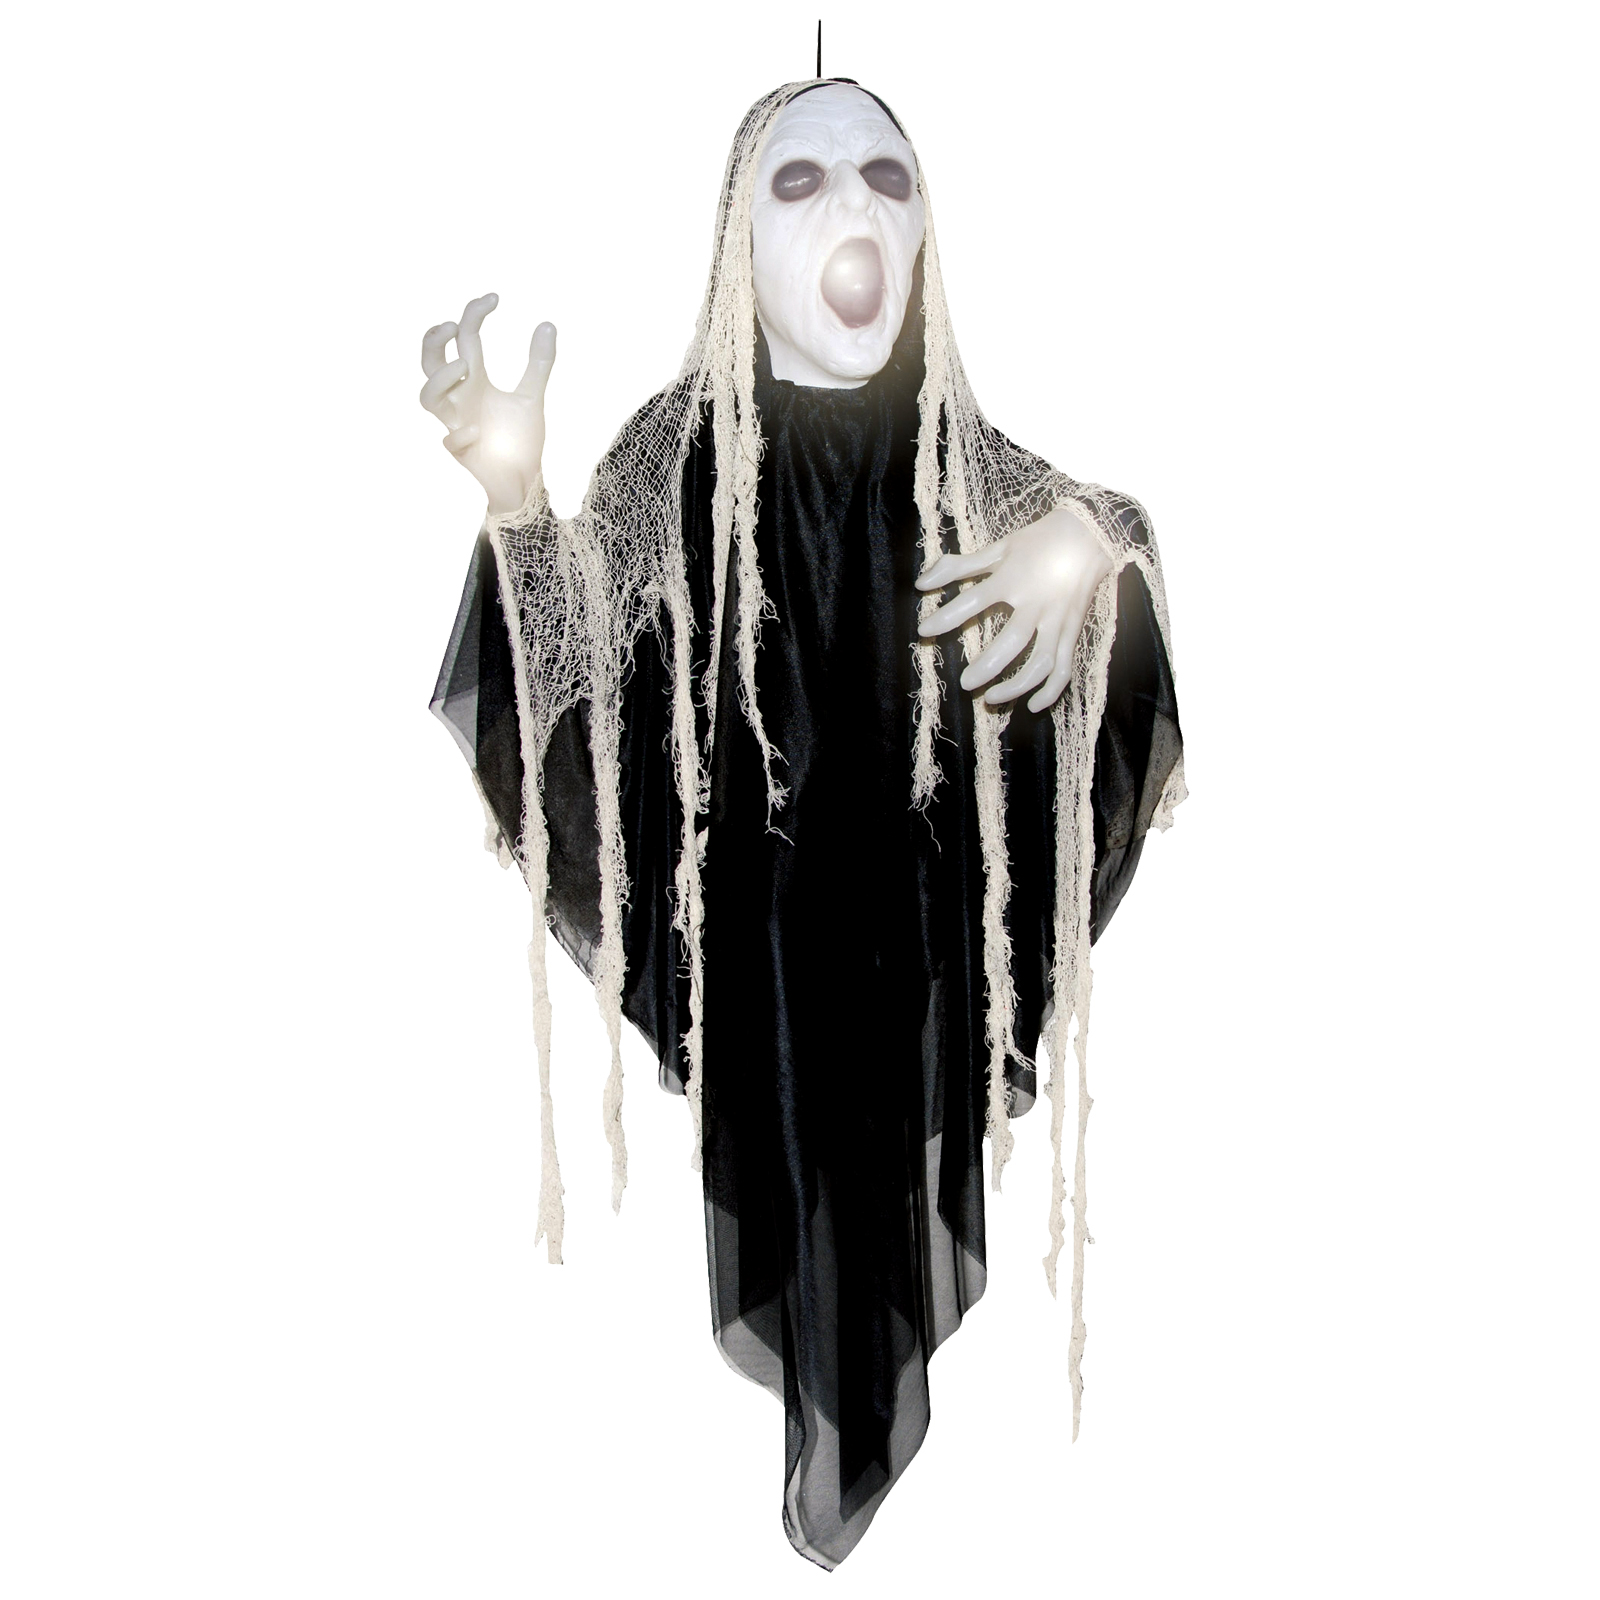 60" Sinister Reaper Light-Up with Creepy Sound Effects